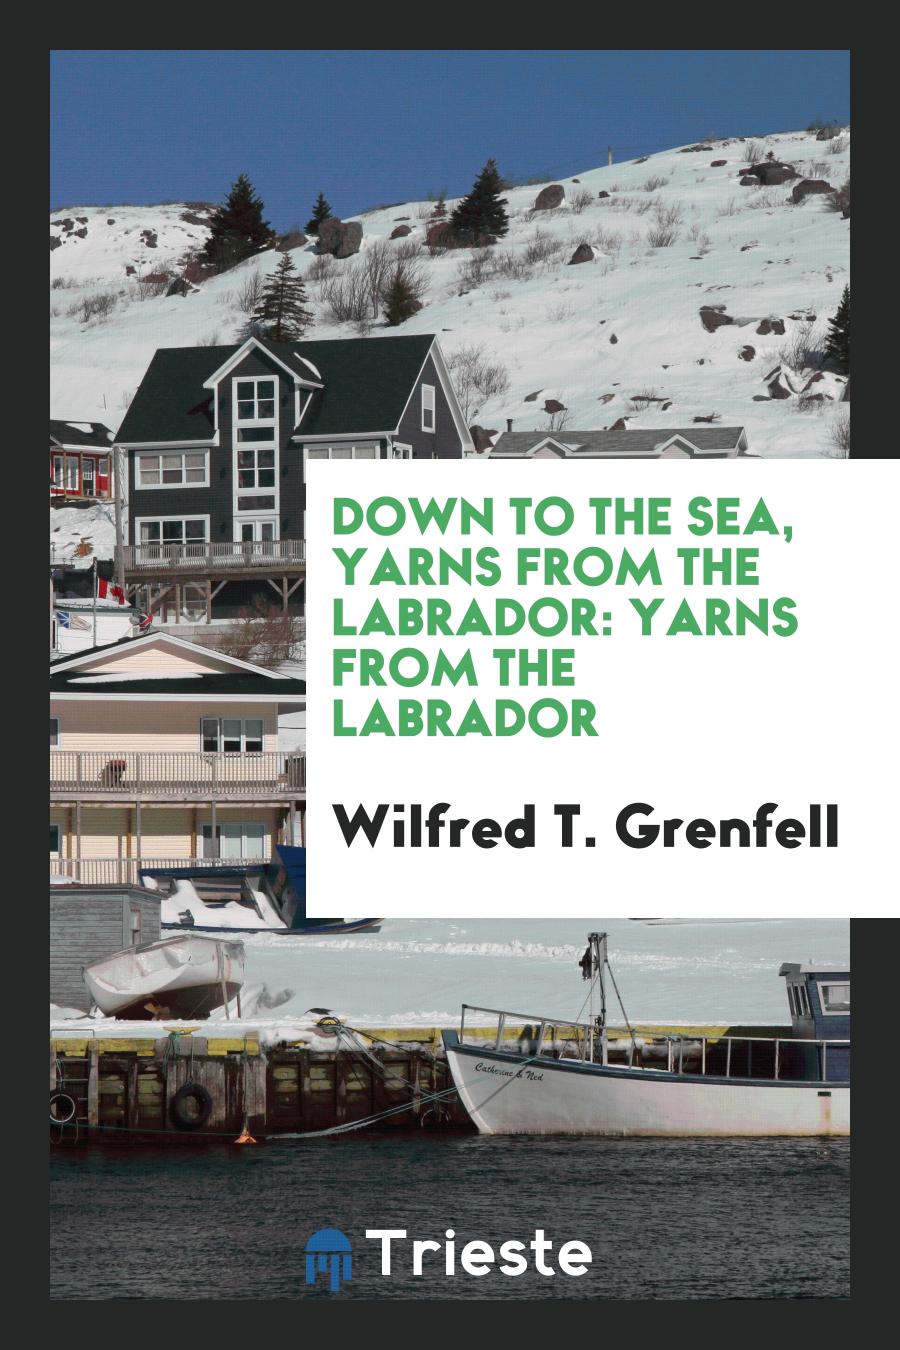 Wilfred T. Grenfell - Down to the Sea, Yarns from the Labrador: Yarns from the Labrador